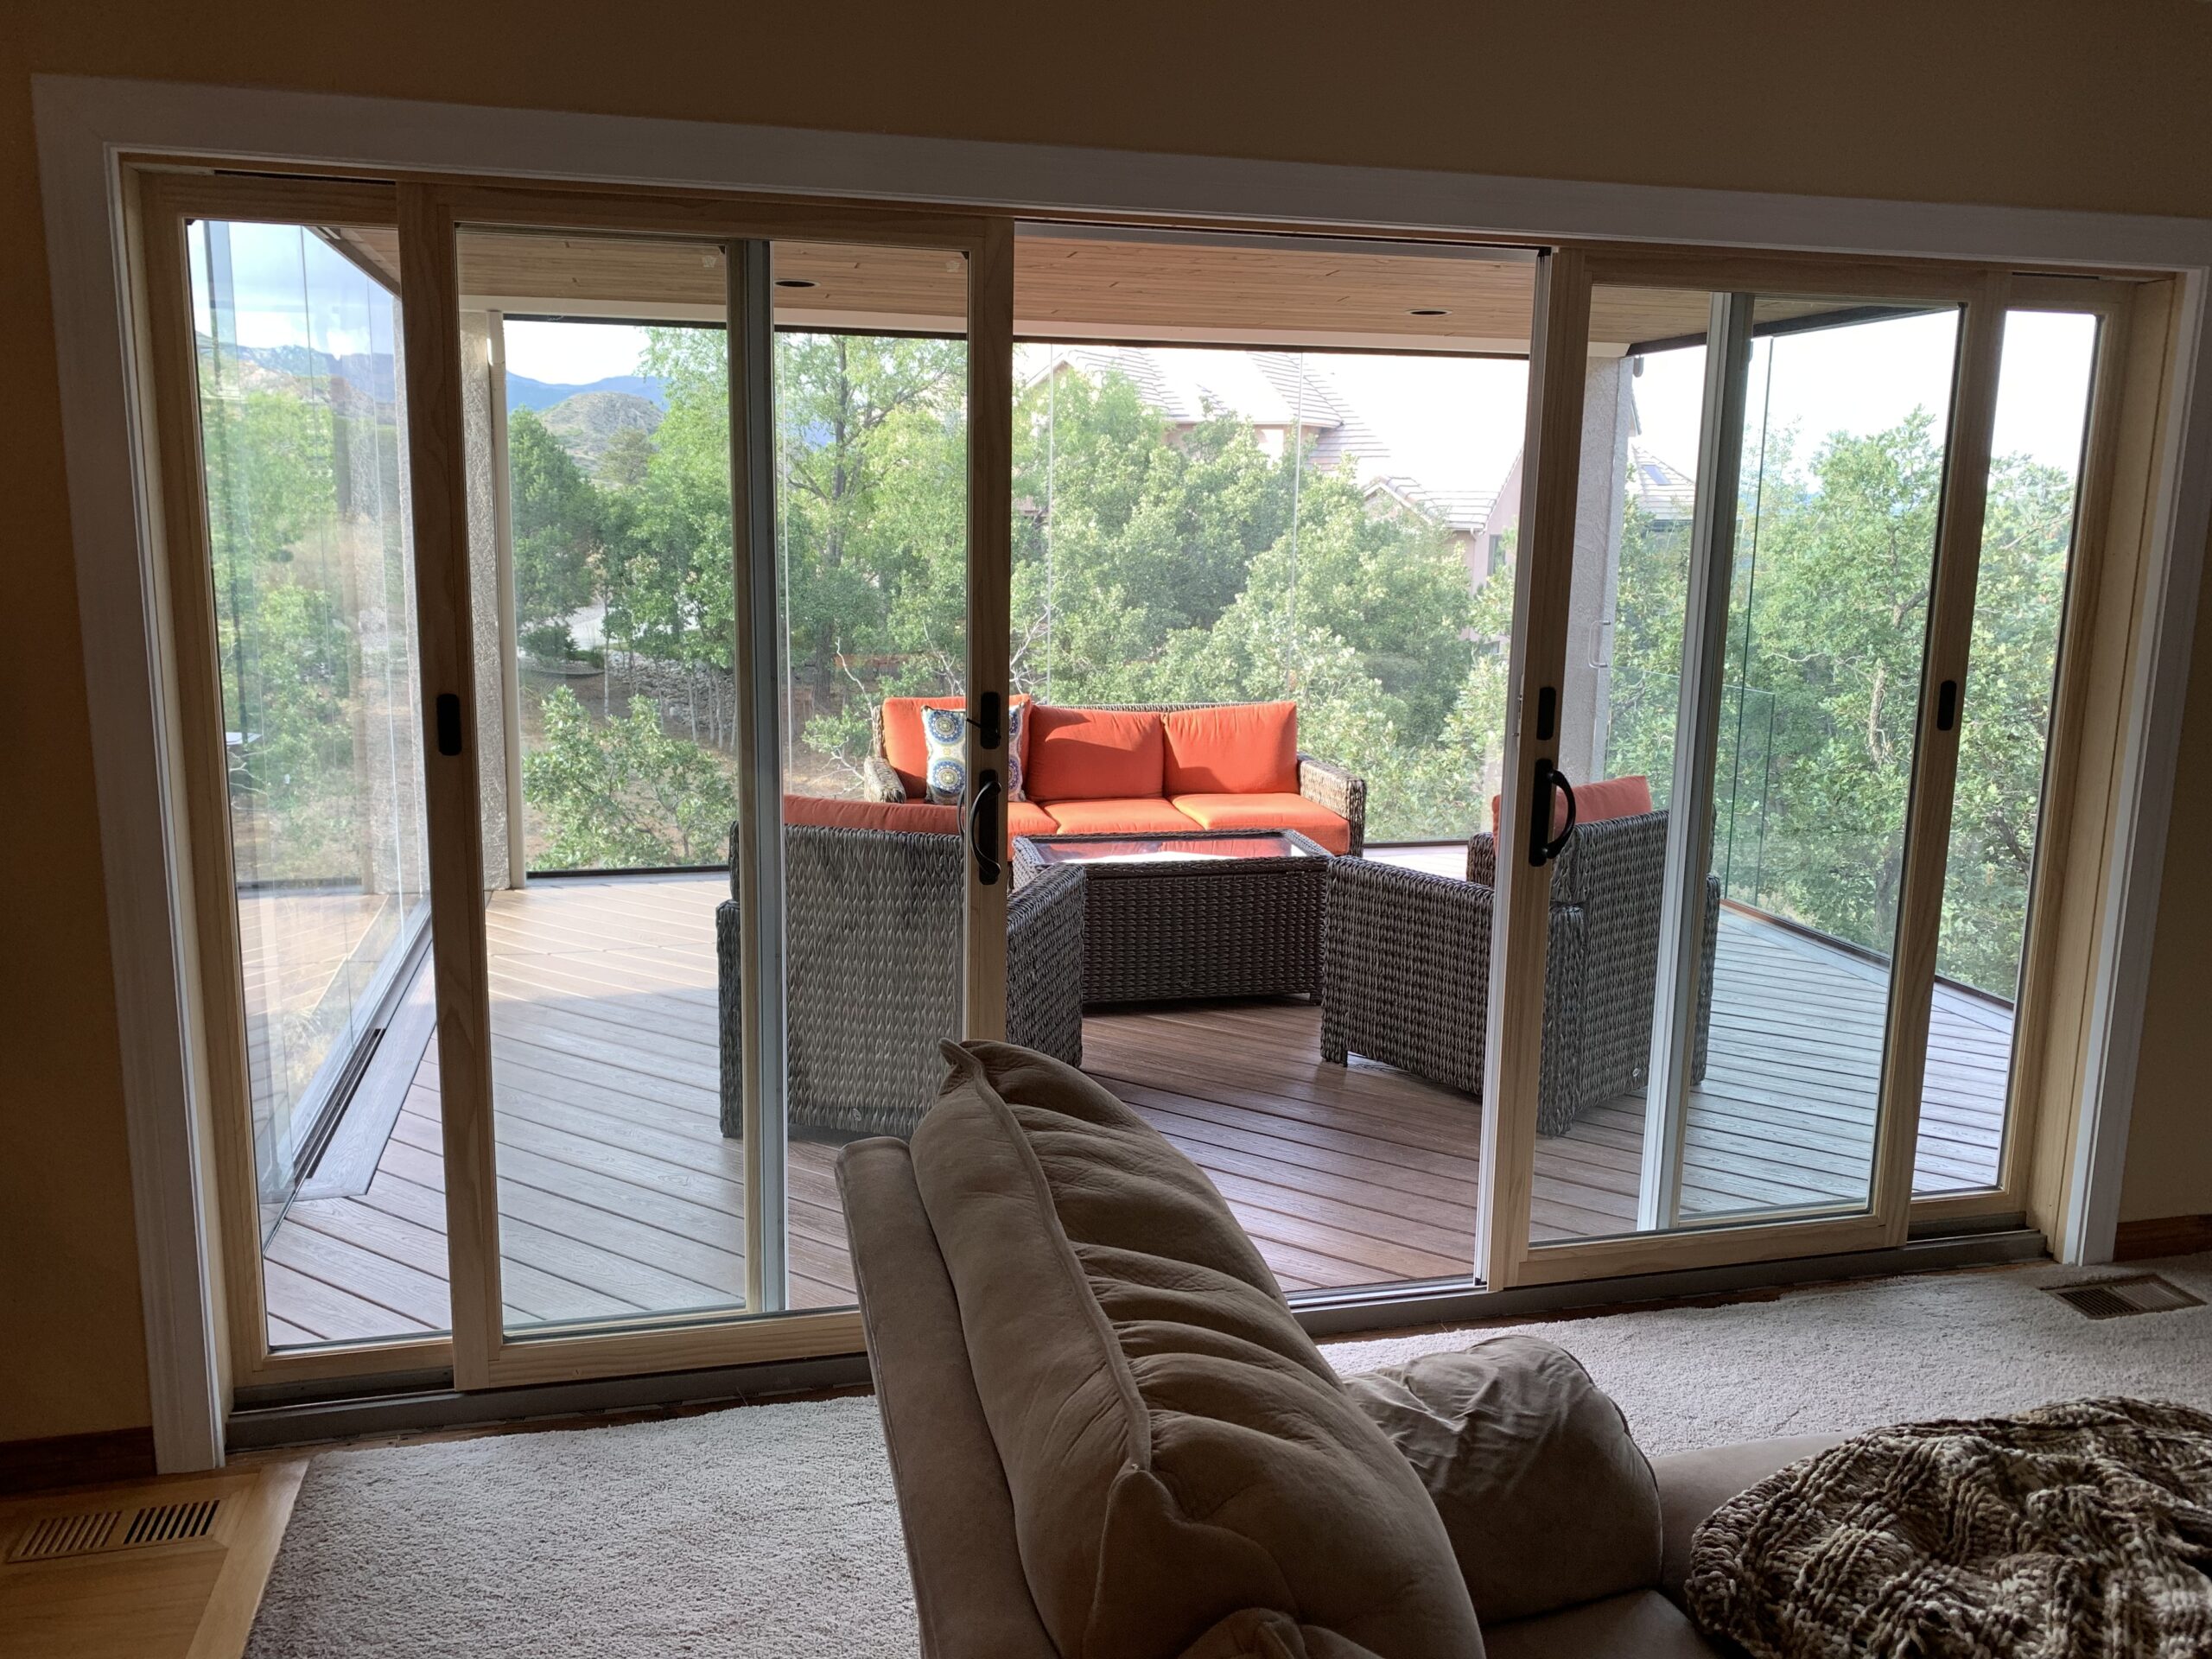 Sliding patio doors installed to provide access to glass enclosed 3-season room